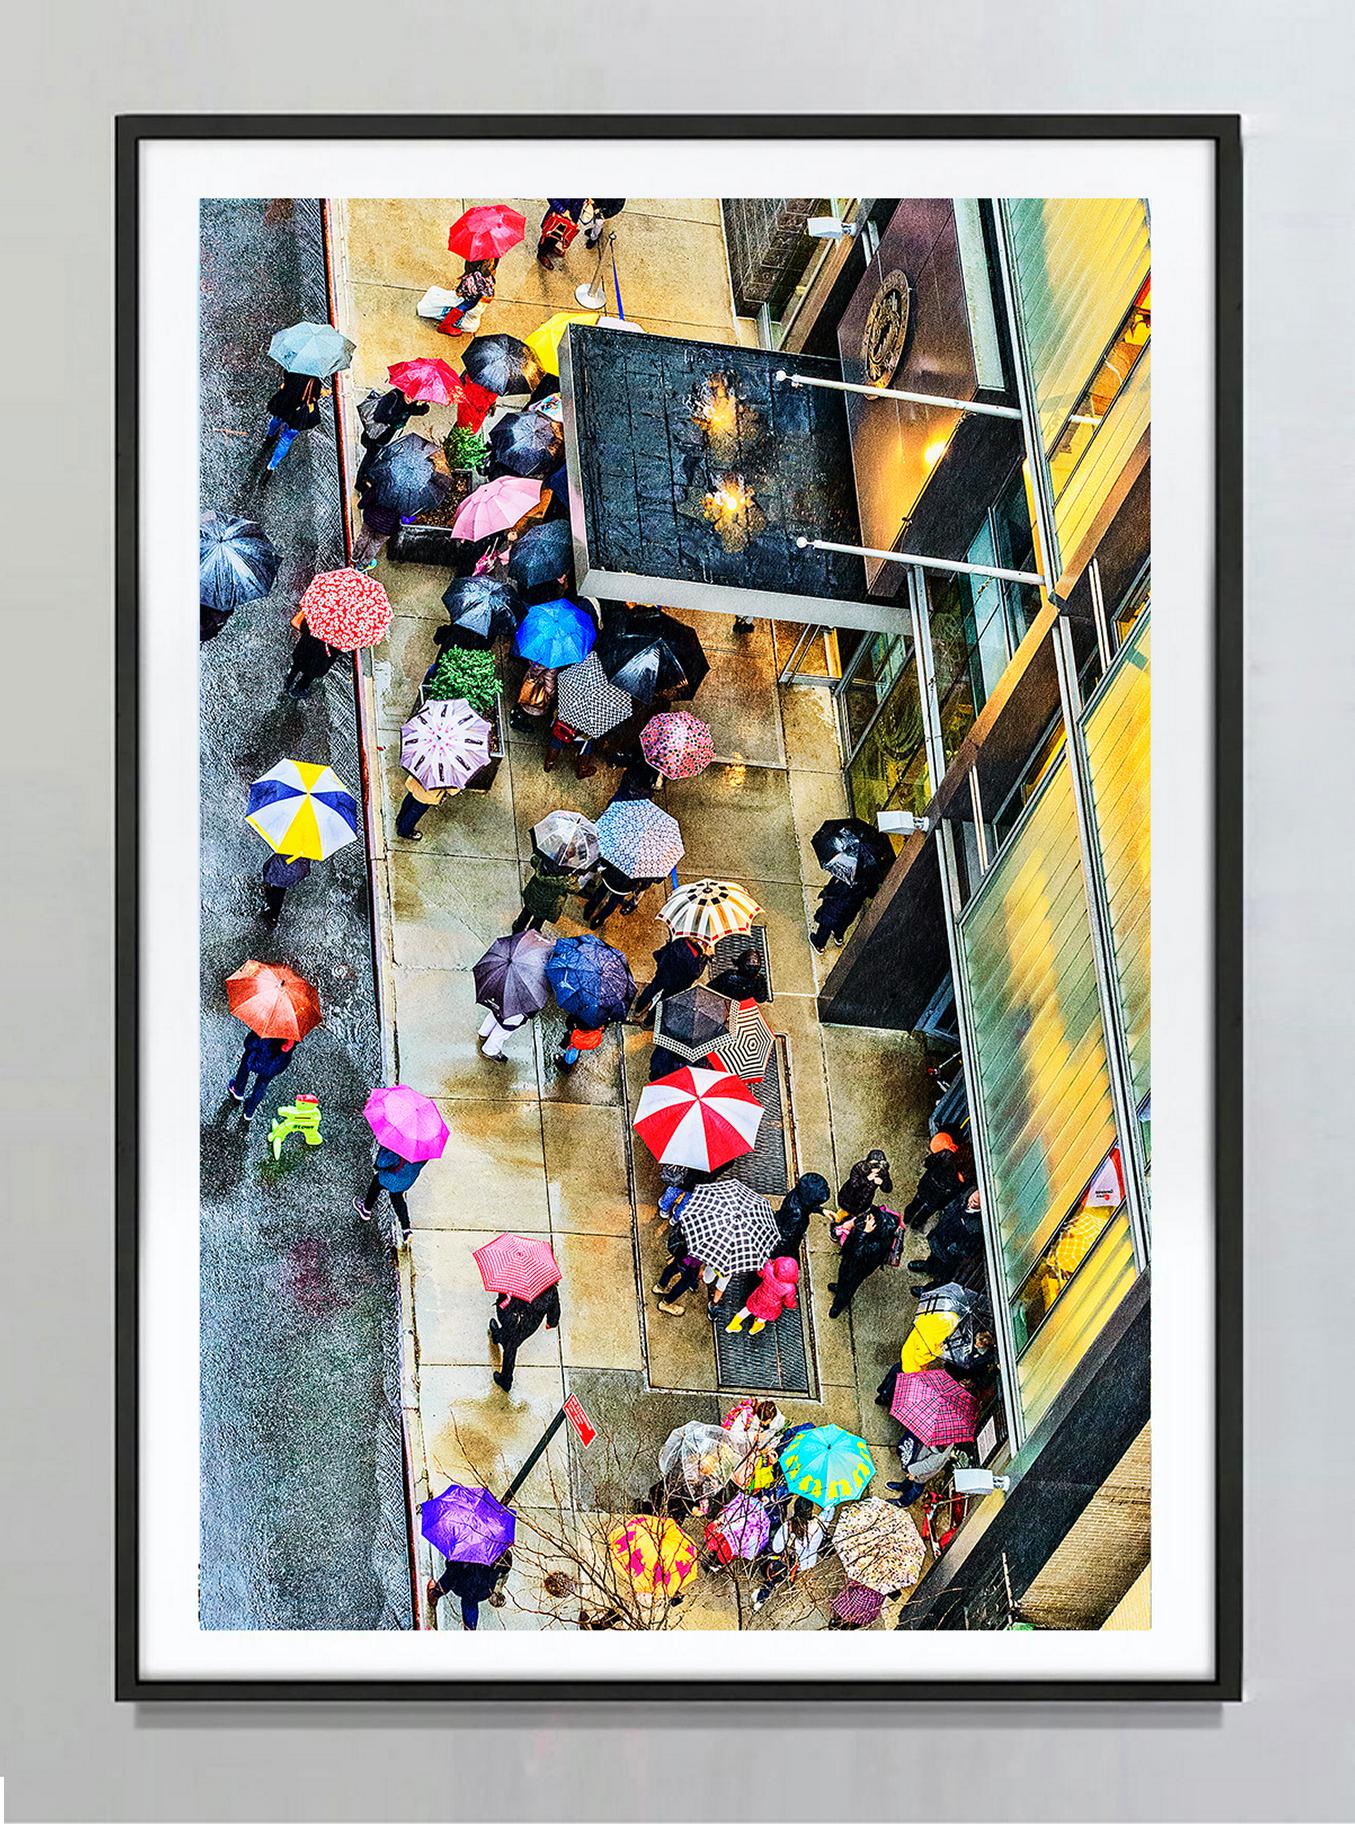 Landscape of Umbrellas in the Rain  -  Moody New York Afternoon - Photograph by Mitchell Funk